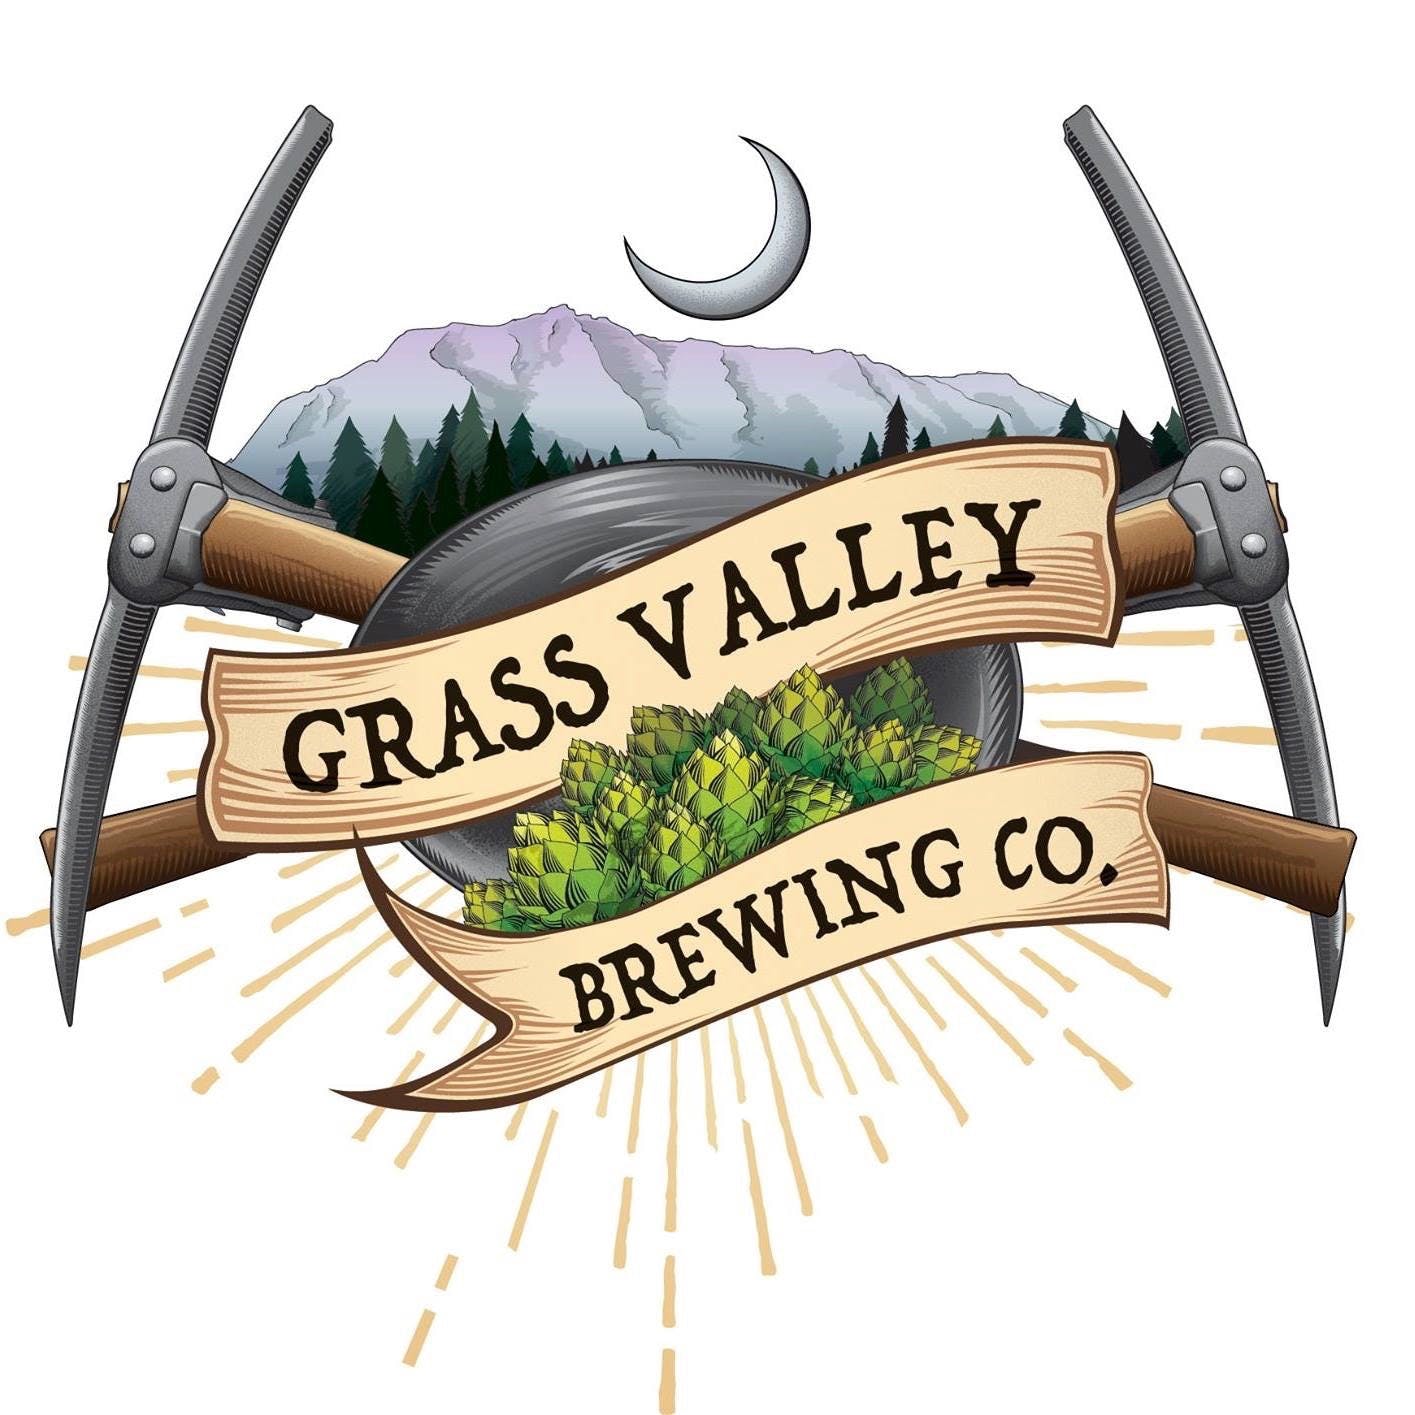 Grass Valley Brewing Company